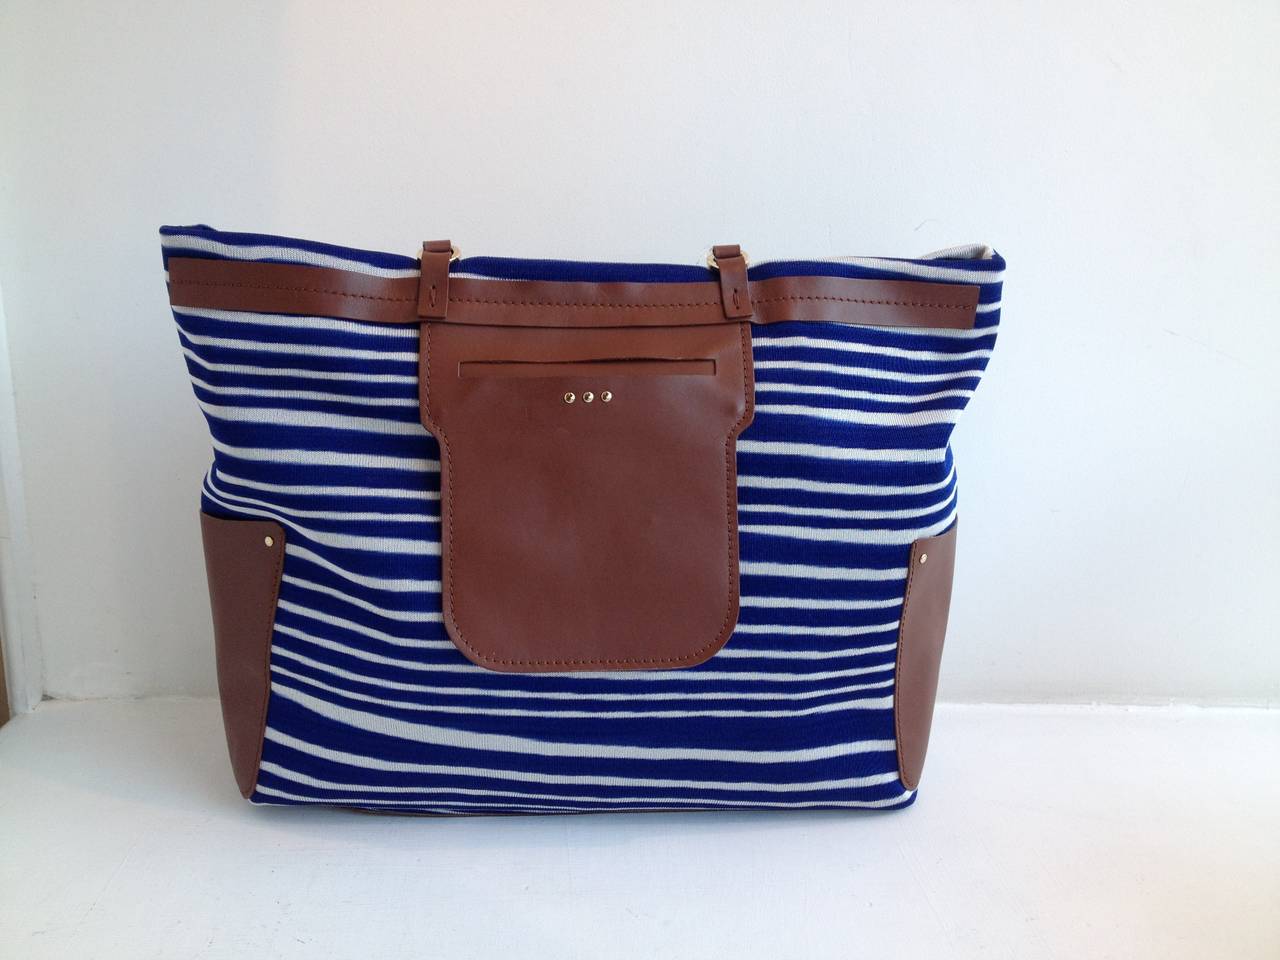 We're seeing stripes! This fun Missoni bag has a standout, cheerful look - the bright blue and white stripes draw from classic Missoni knit patterns, while the brown leather trim adds contrast. The bag features two studded handles with an 8.5 inch